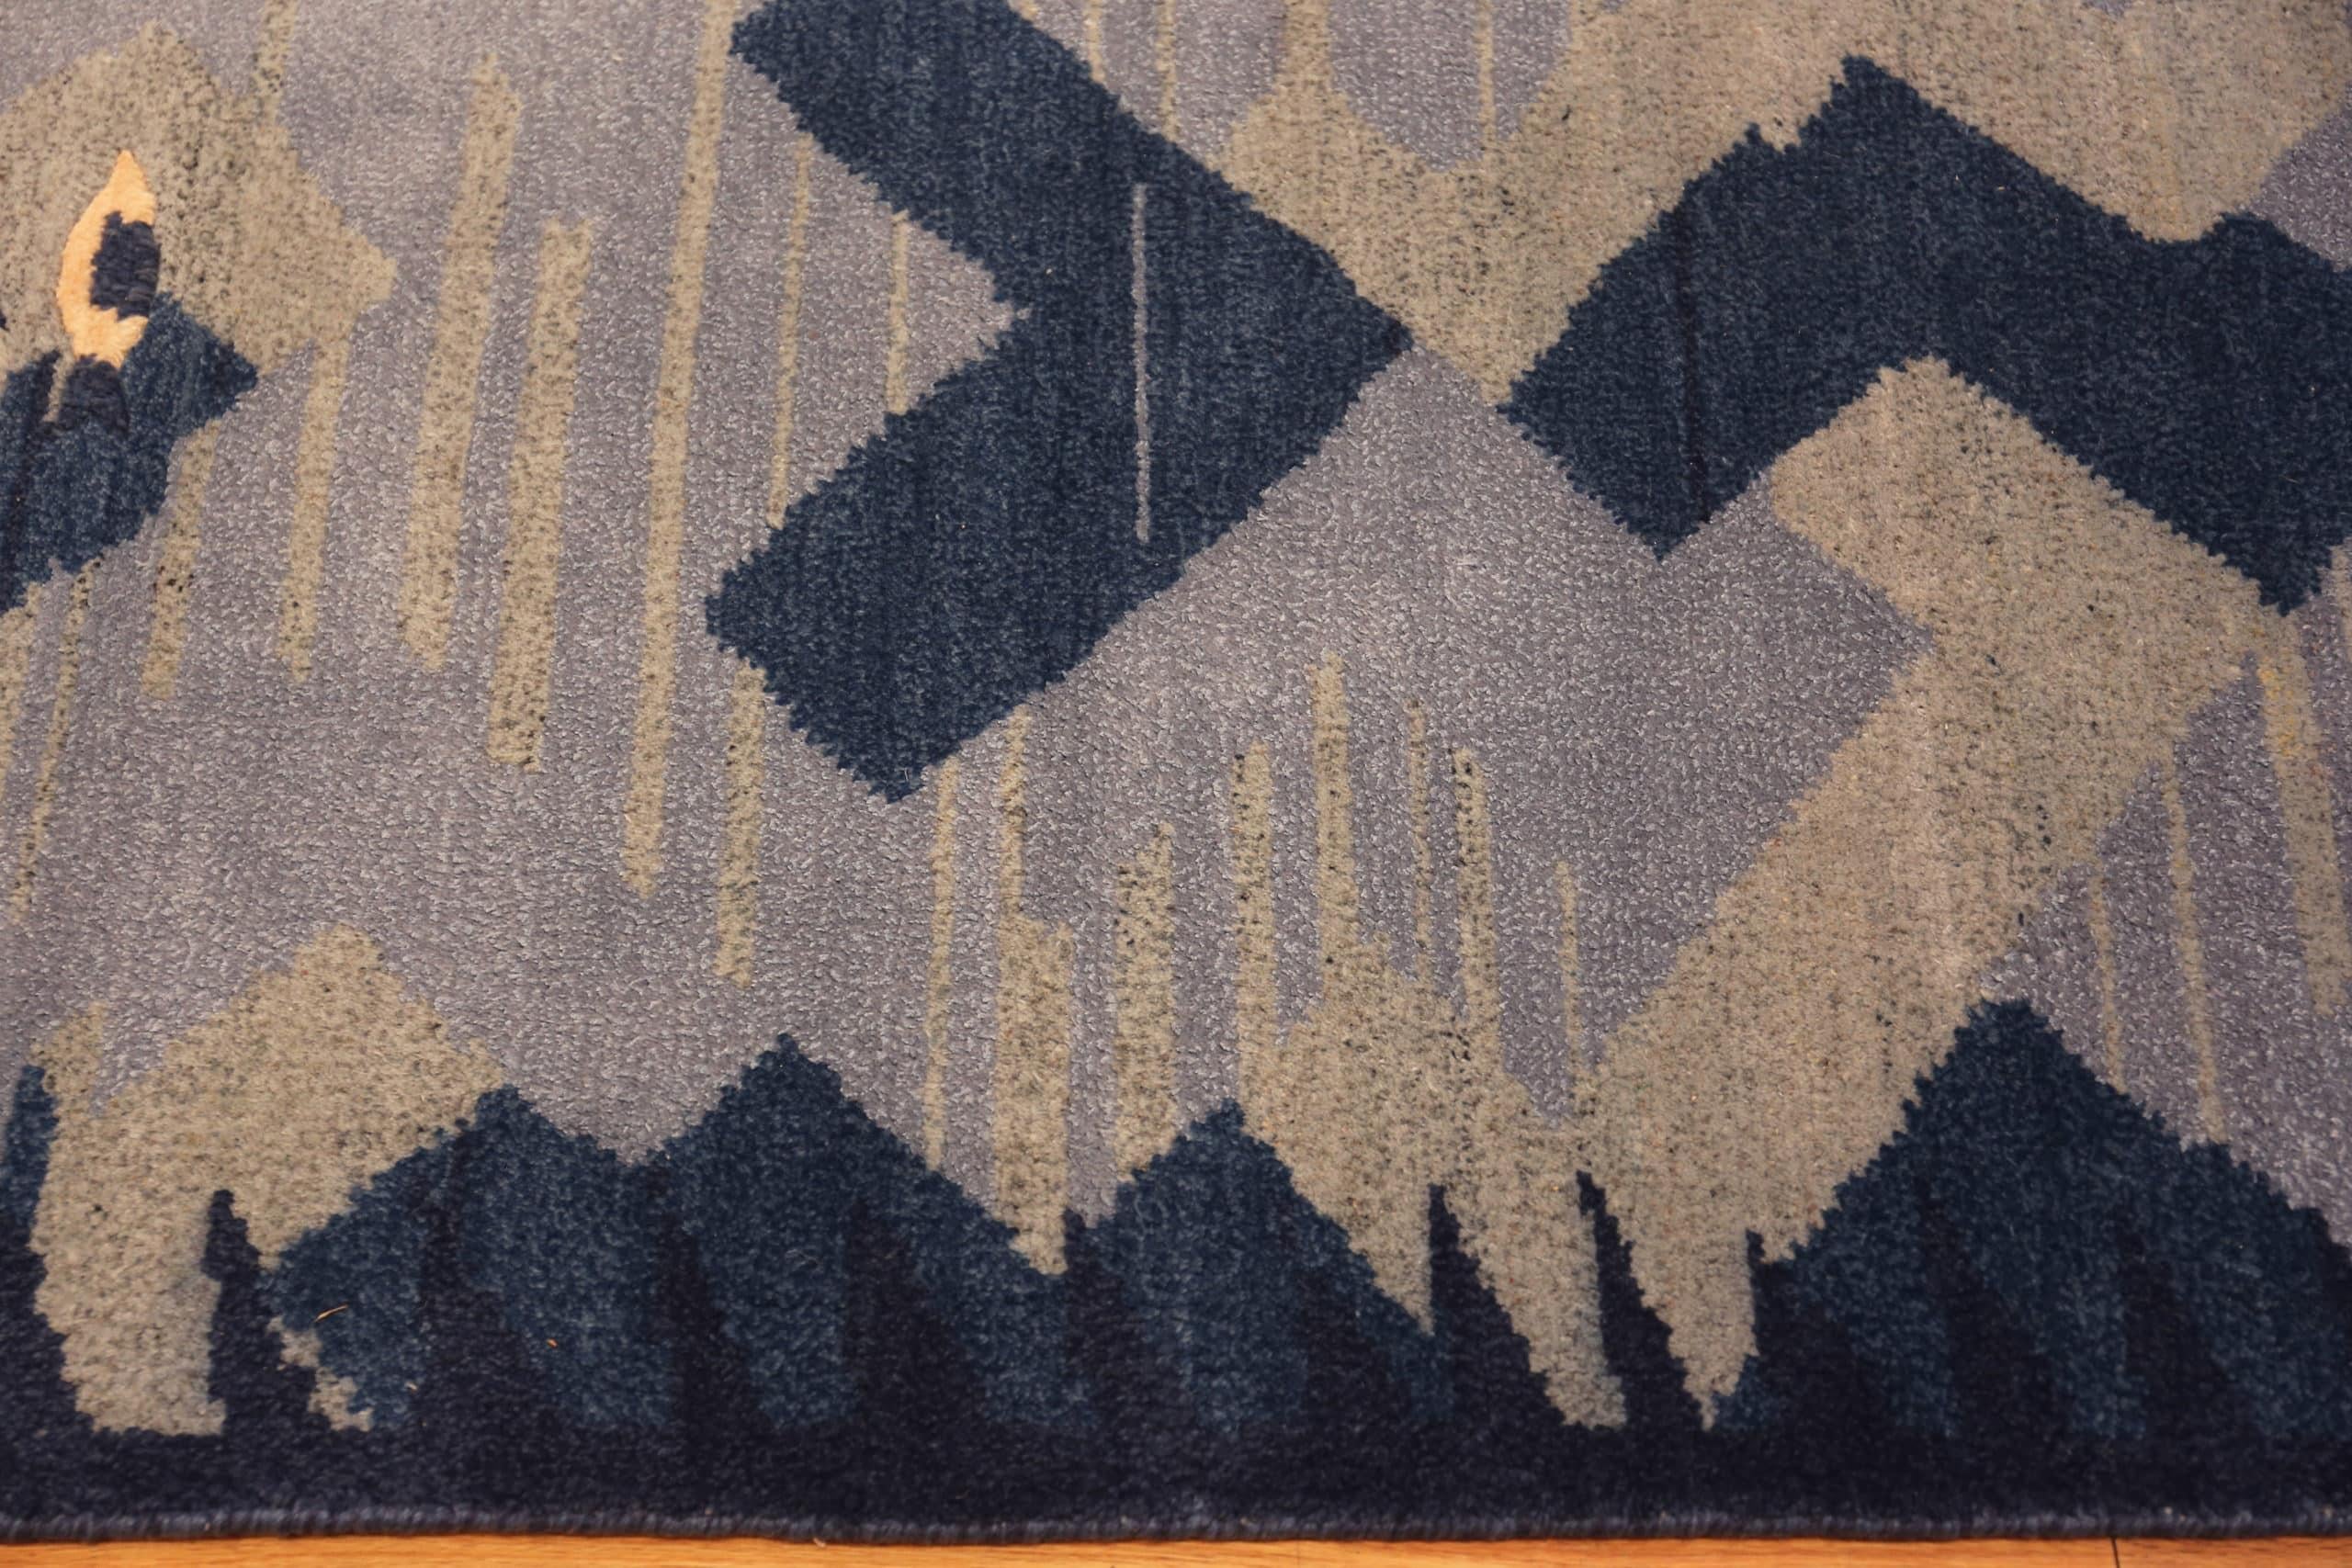 Nazmiyal Collection Elsa Gullberg Inspired Modern Swedish Rug, Country of Origin: Modern India Rugs. Circa date: Modern. Size: 8 ft 2 in x 9 ft 11 in (2.48 m x 3.02 m)

